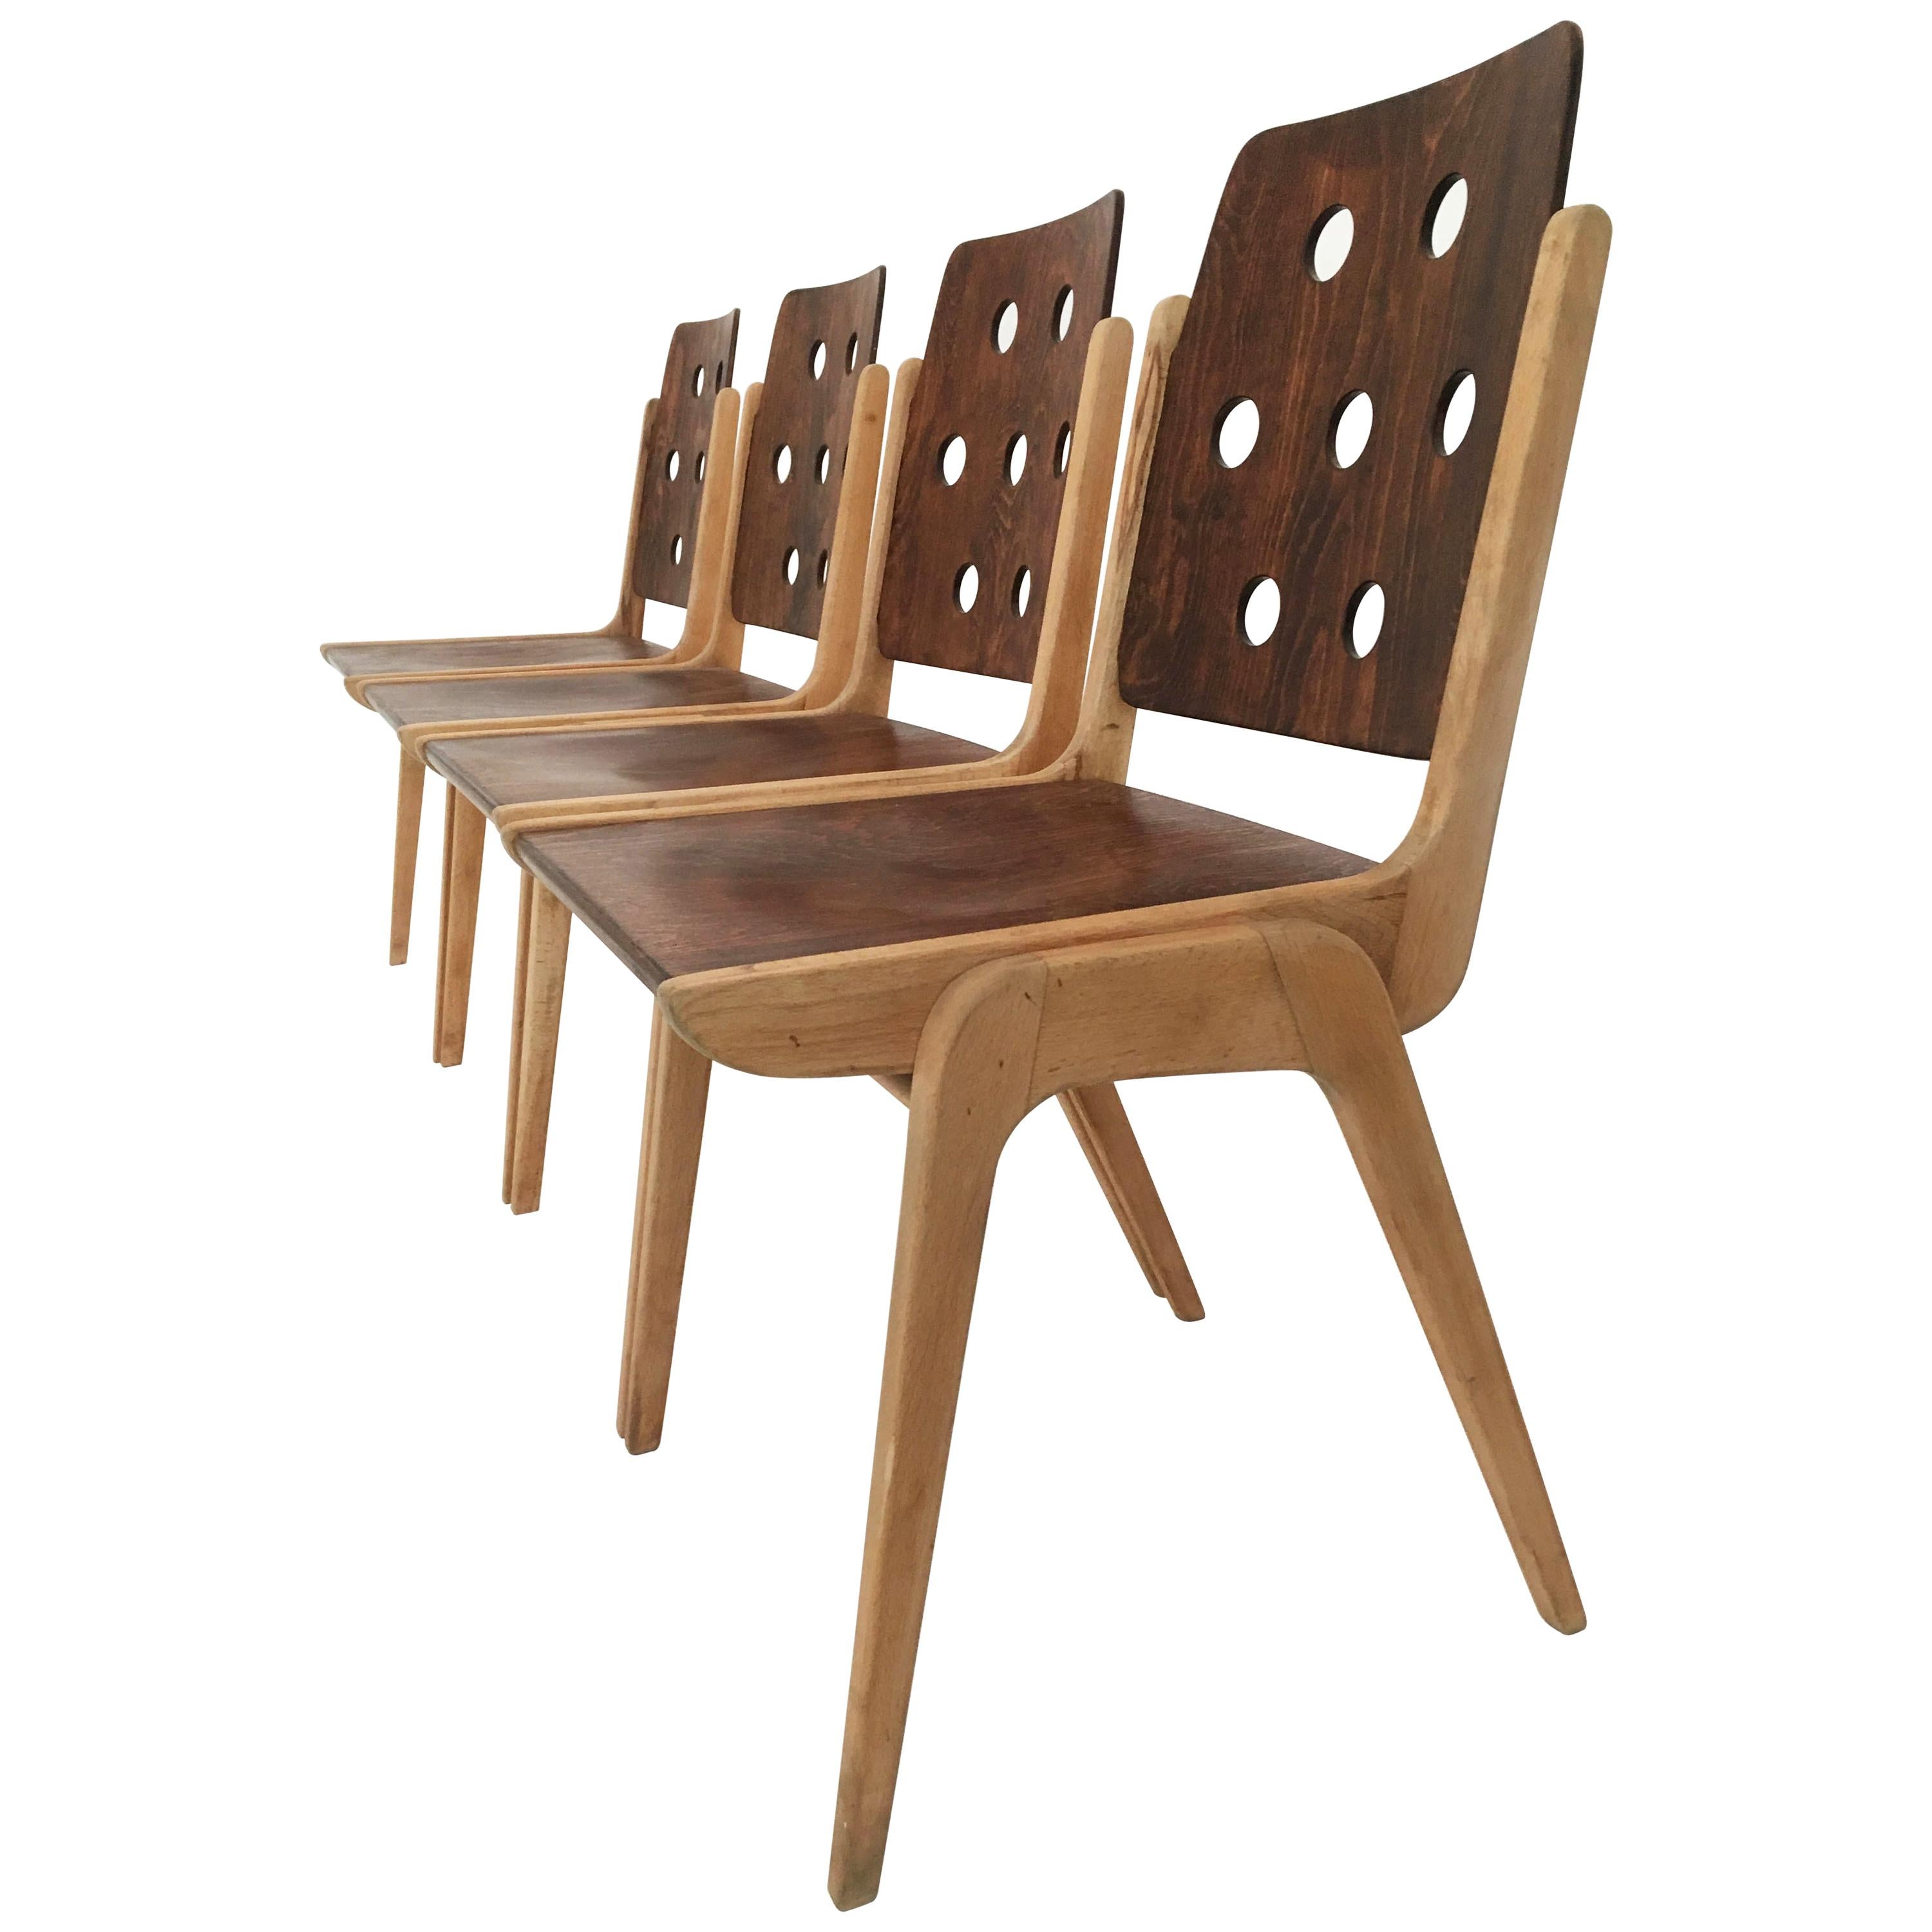 Set of Four Stacking Chairs Franz Schuster, Duo-Colored, Austria 1950s For Sale